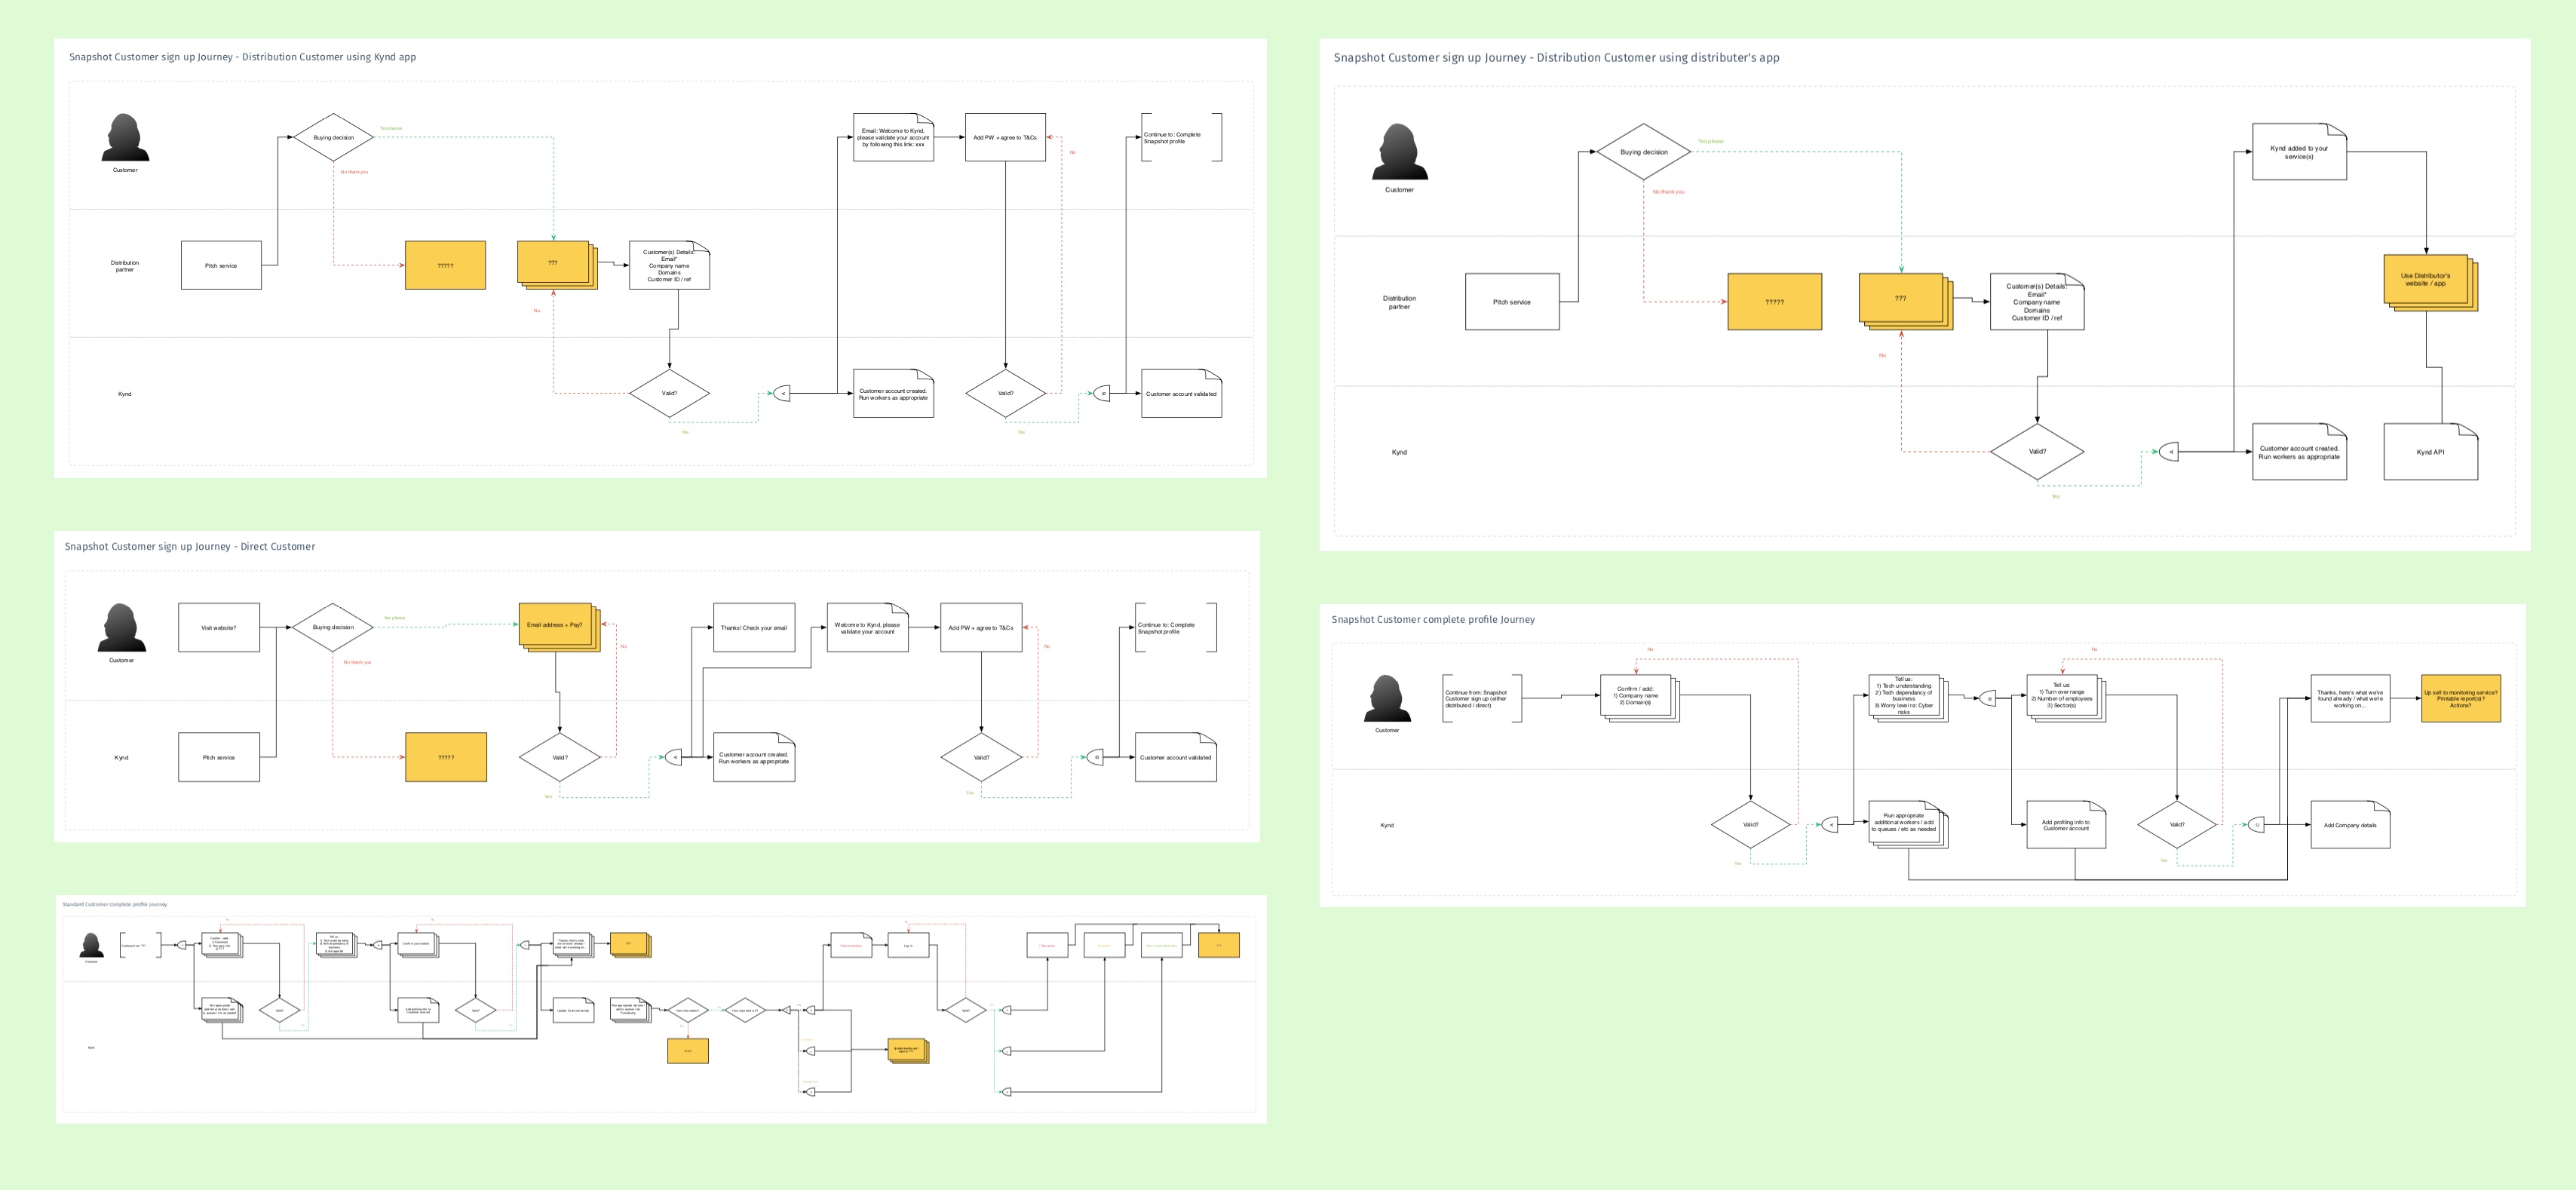 On boarding and first time use user journey maps